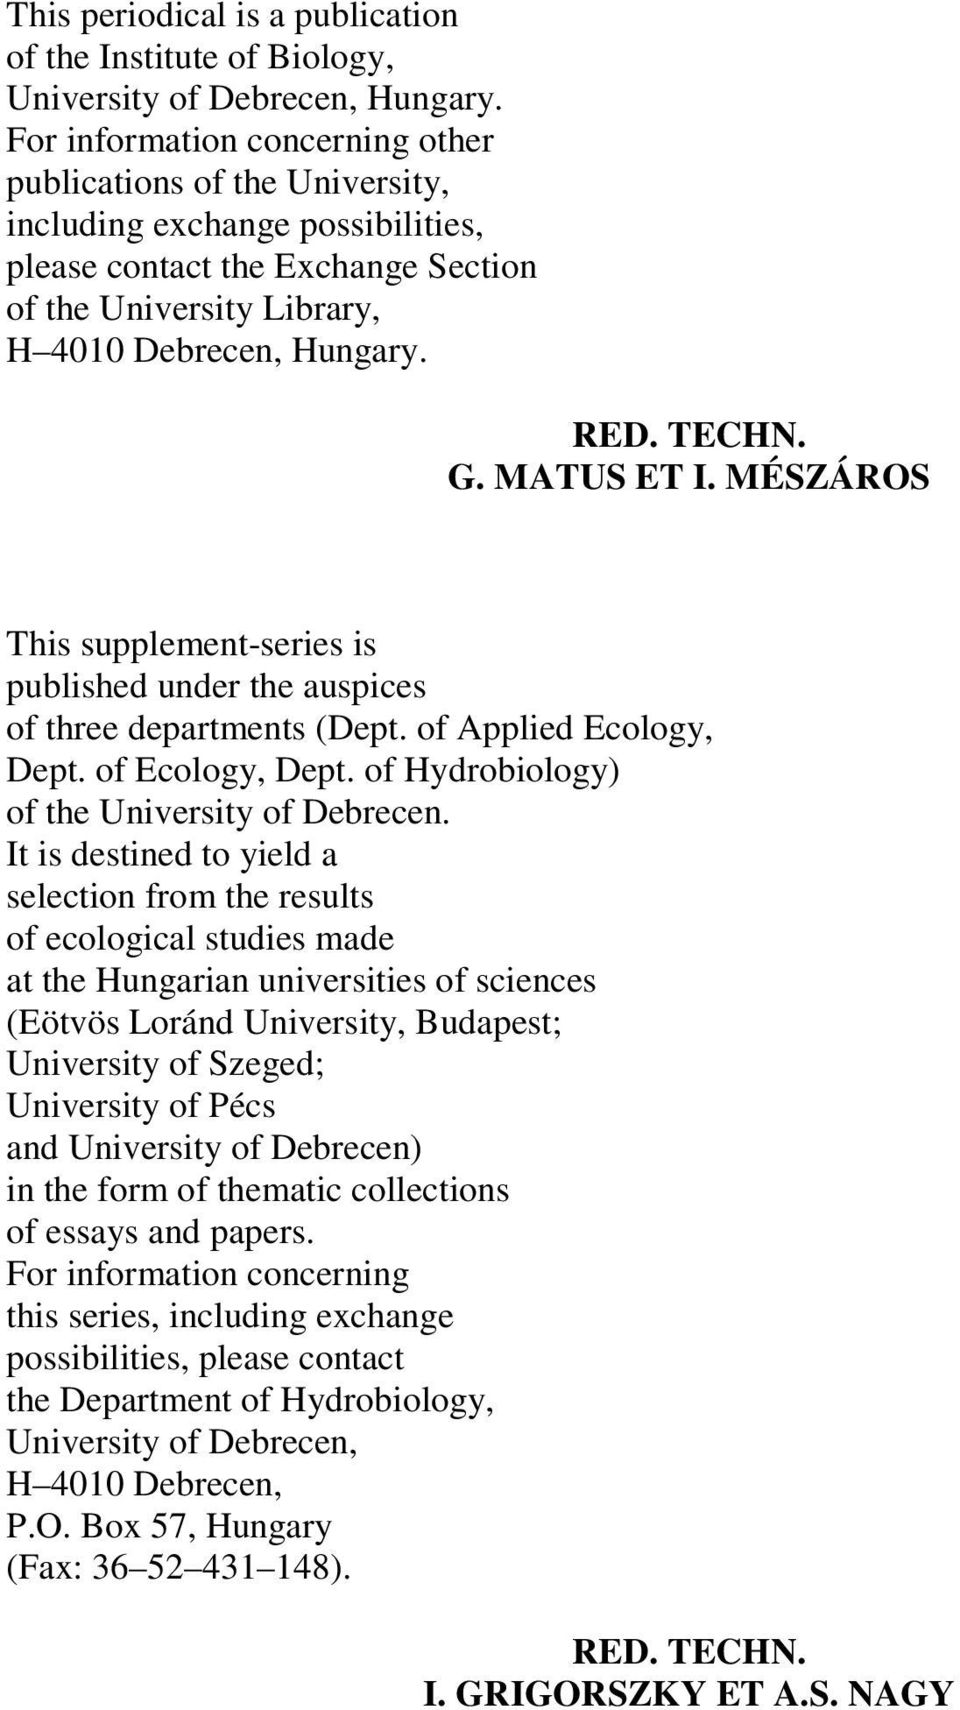 G. MATUS ET I. MÉSZÁROS This supplement-series is published under the auspices of three departments (Dept. of Applied Ecology, Dept. of Ecology, Dept. of Hydrobiology) of the University of Debrecen.